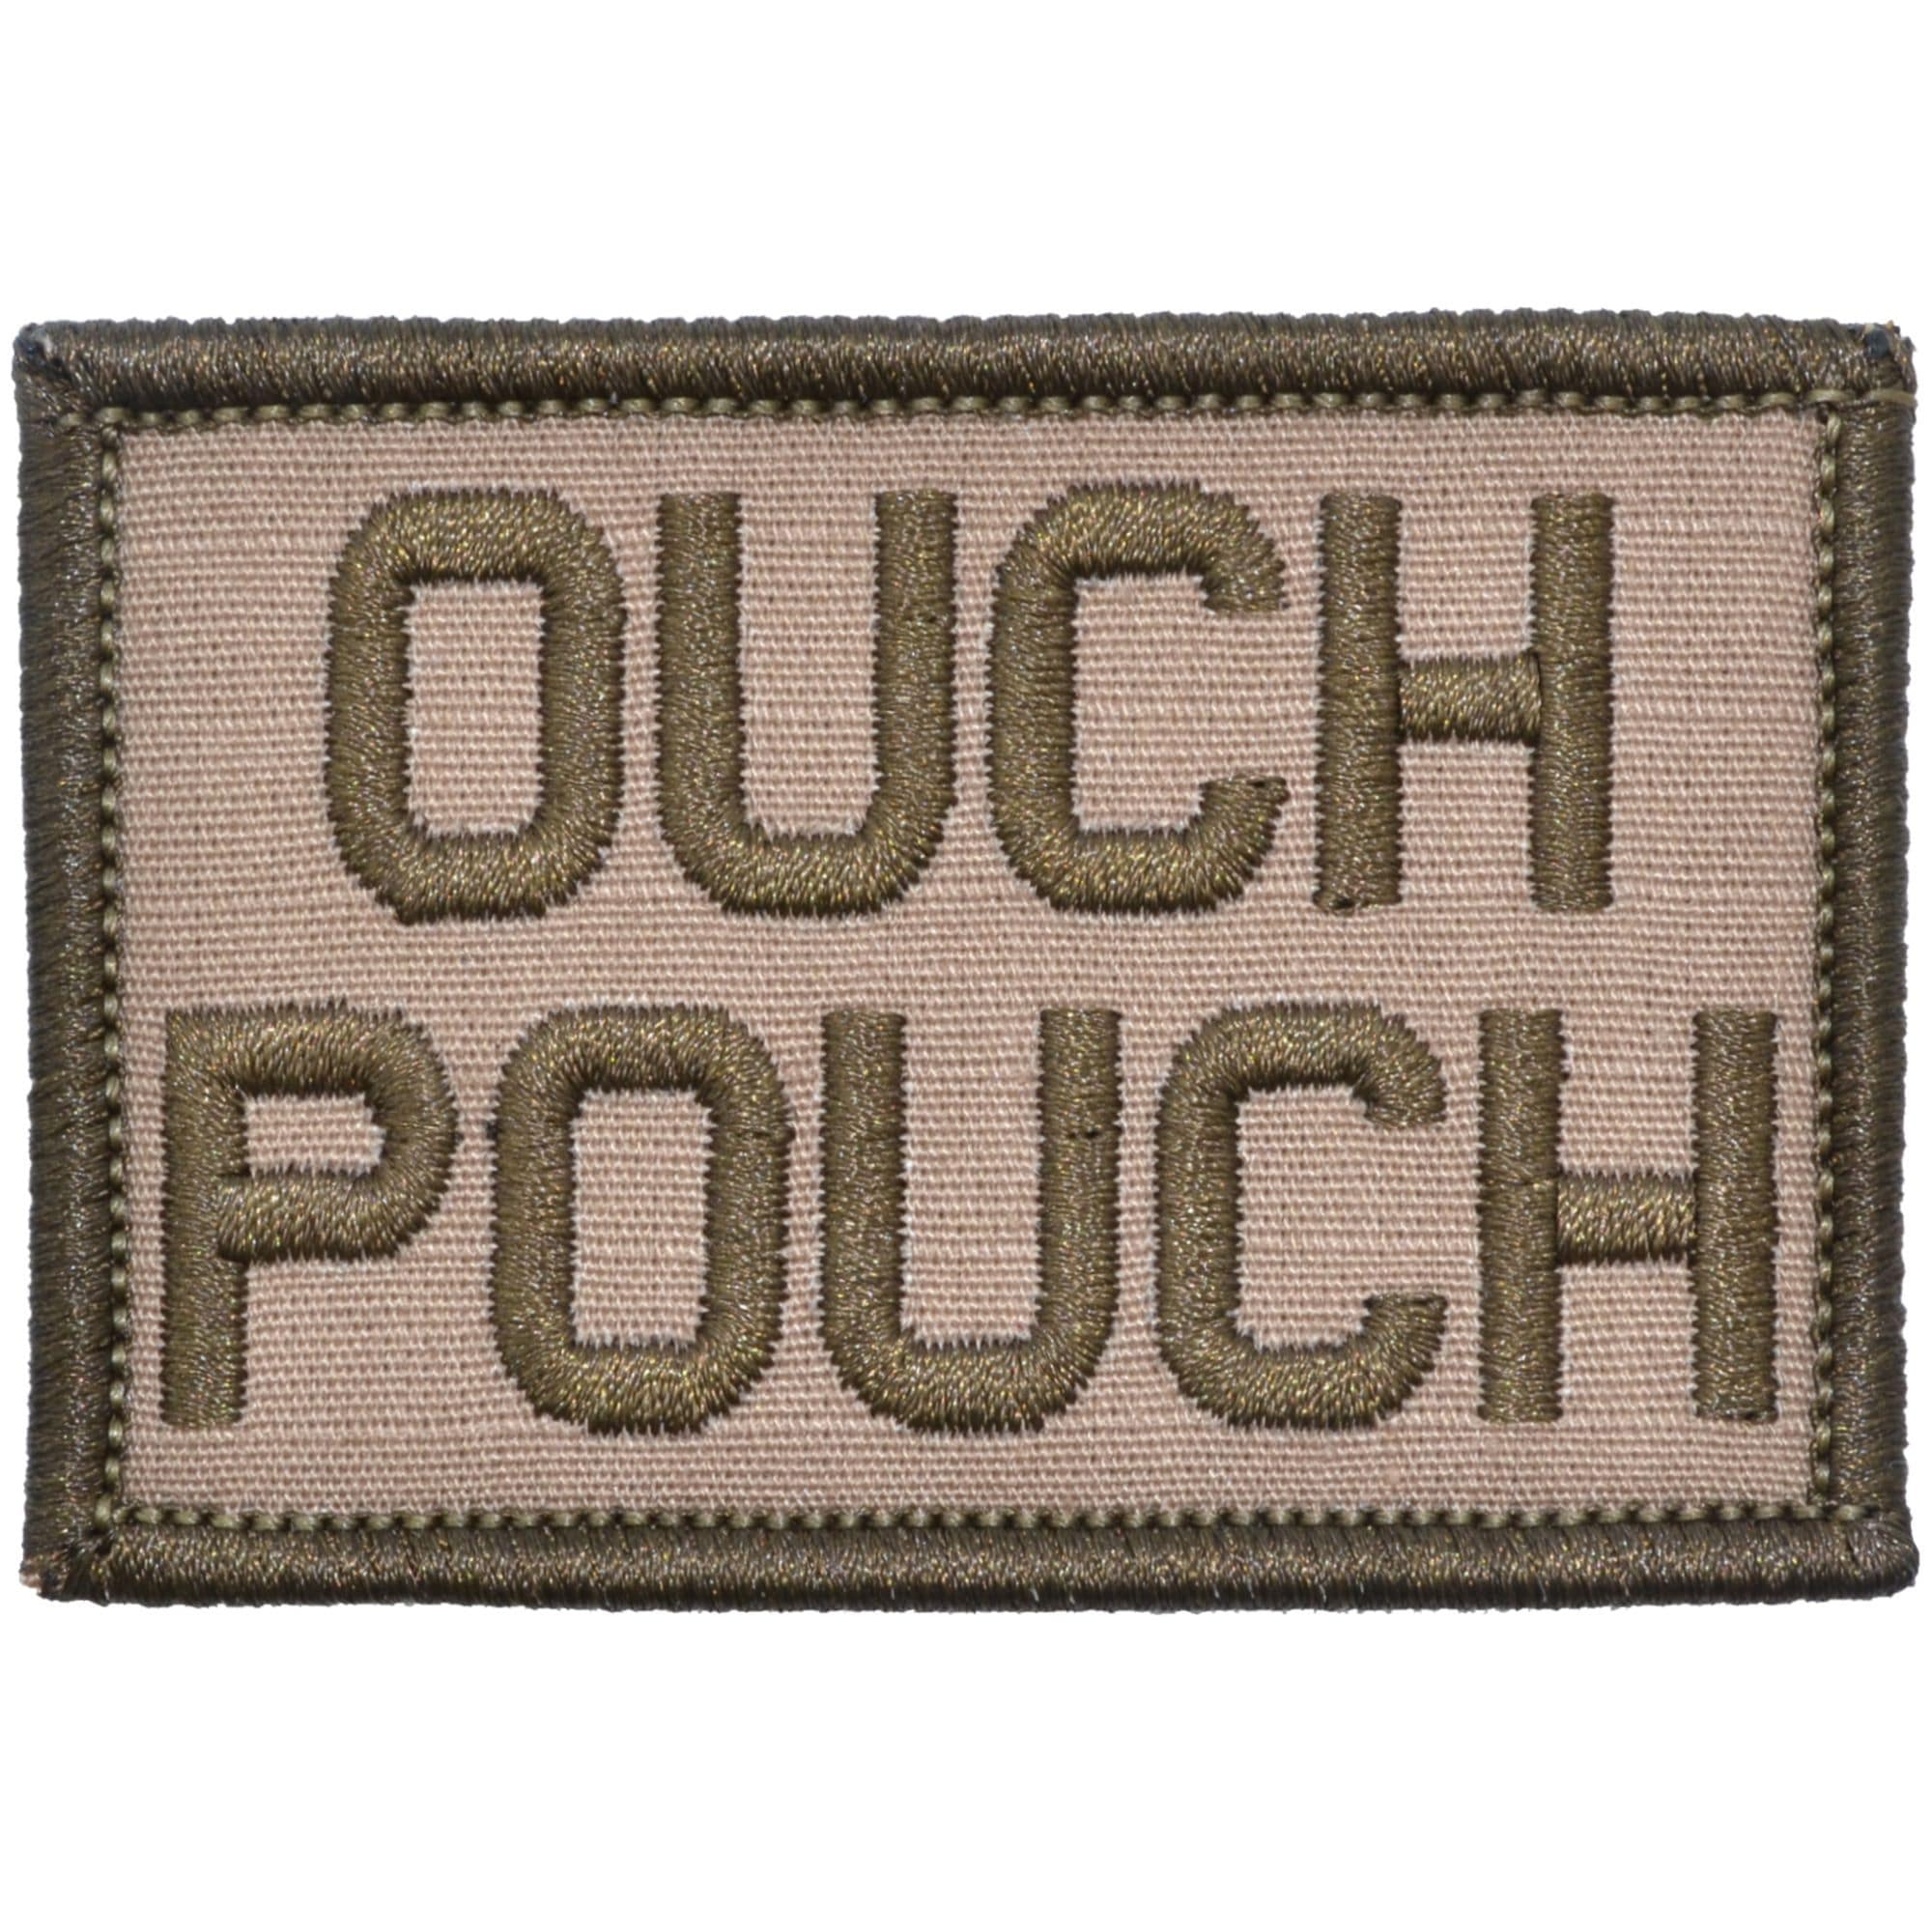 EmbTao Ouch Pouch Embroidered Patch Tactical Moral Applique Fastener Hook & Loop Emblem, Red & Black